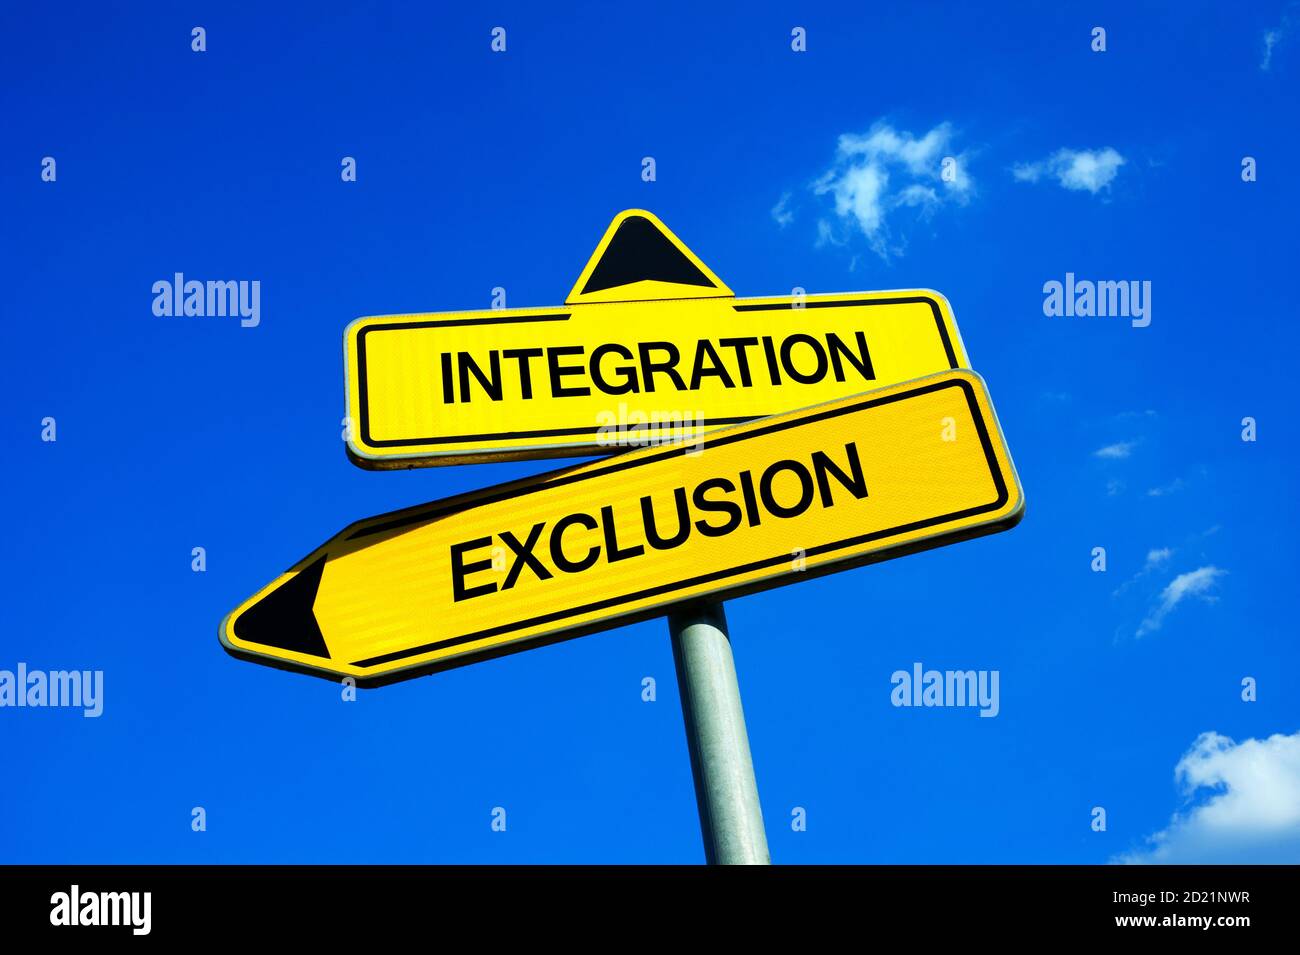 Integration vs Exclusion - Traffic sign with two options - relation between majority and minoriy. Inclusion of diverse people vs segregation and and m Stock Photo